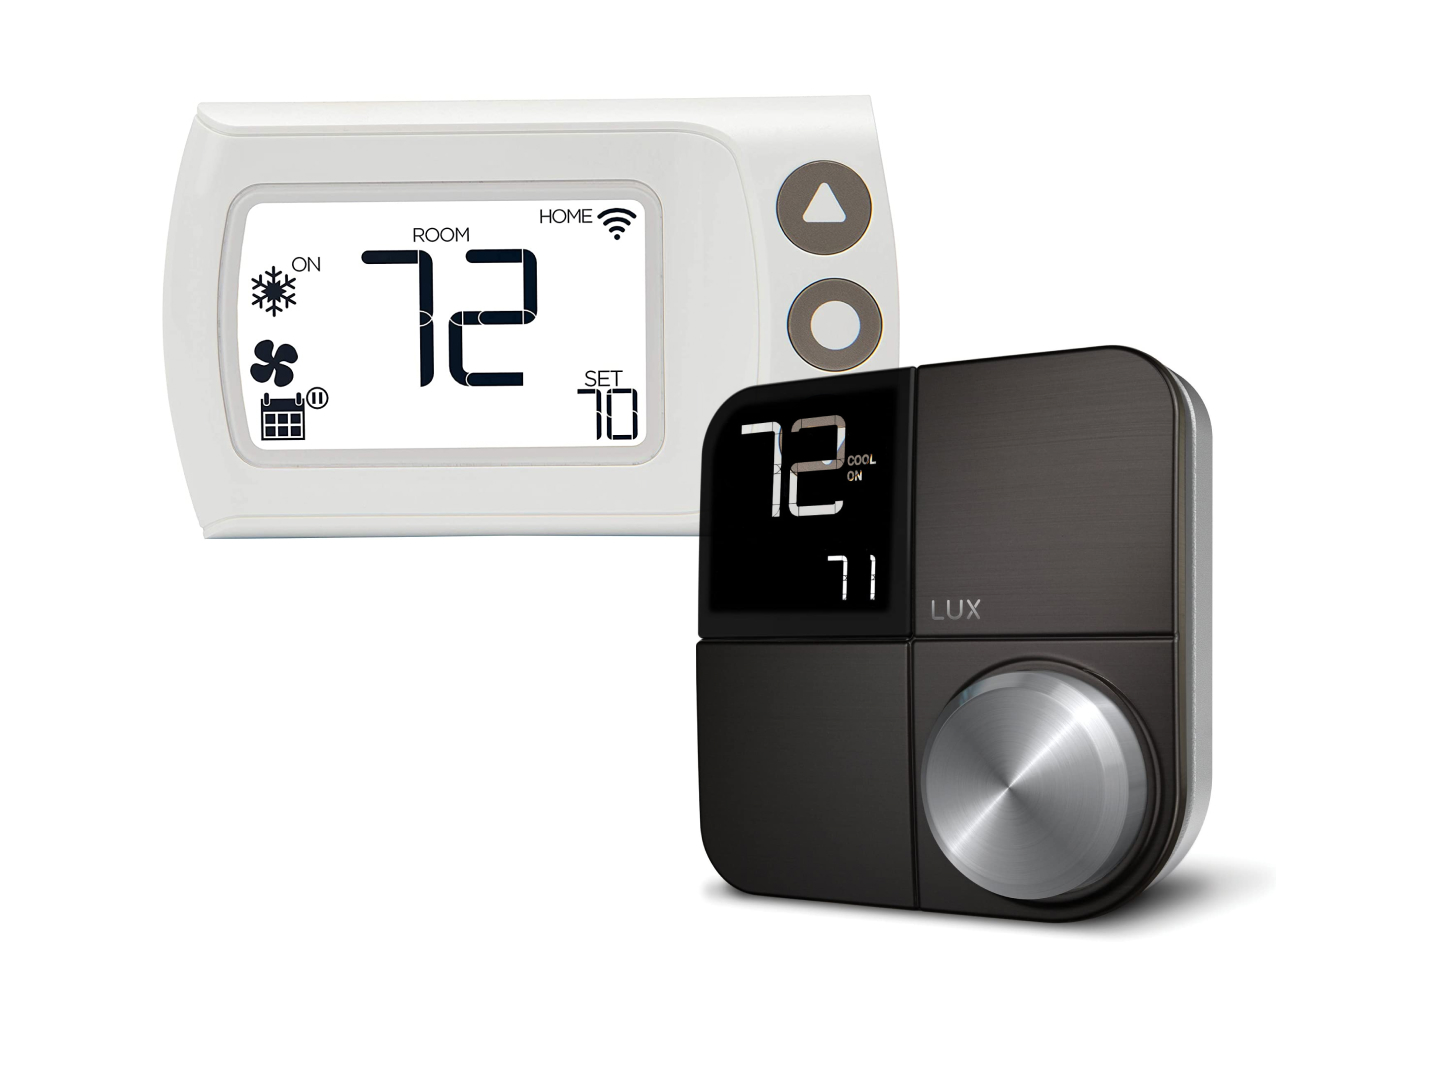 Lux smart thermostat